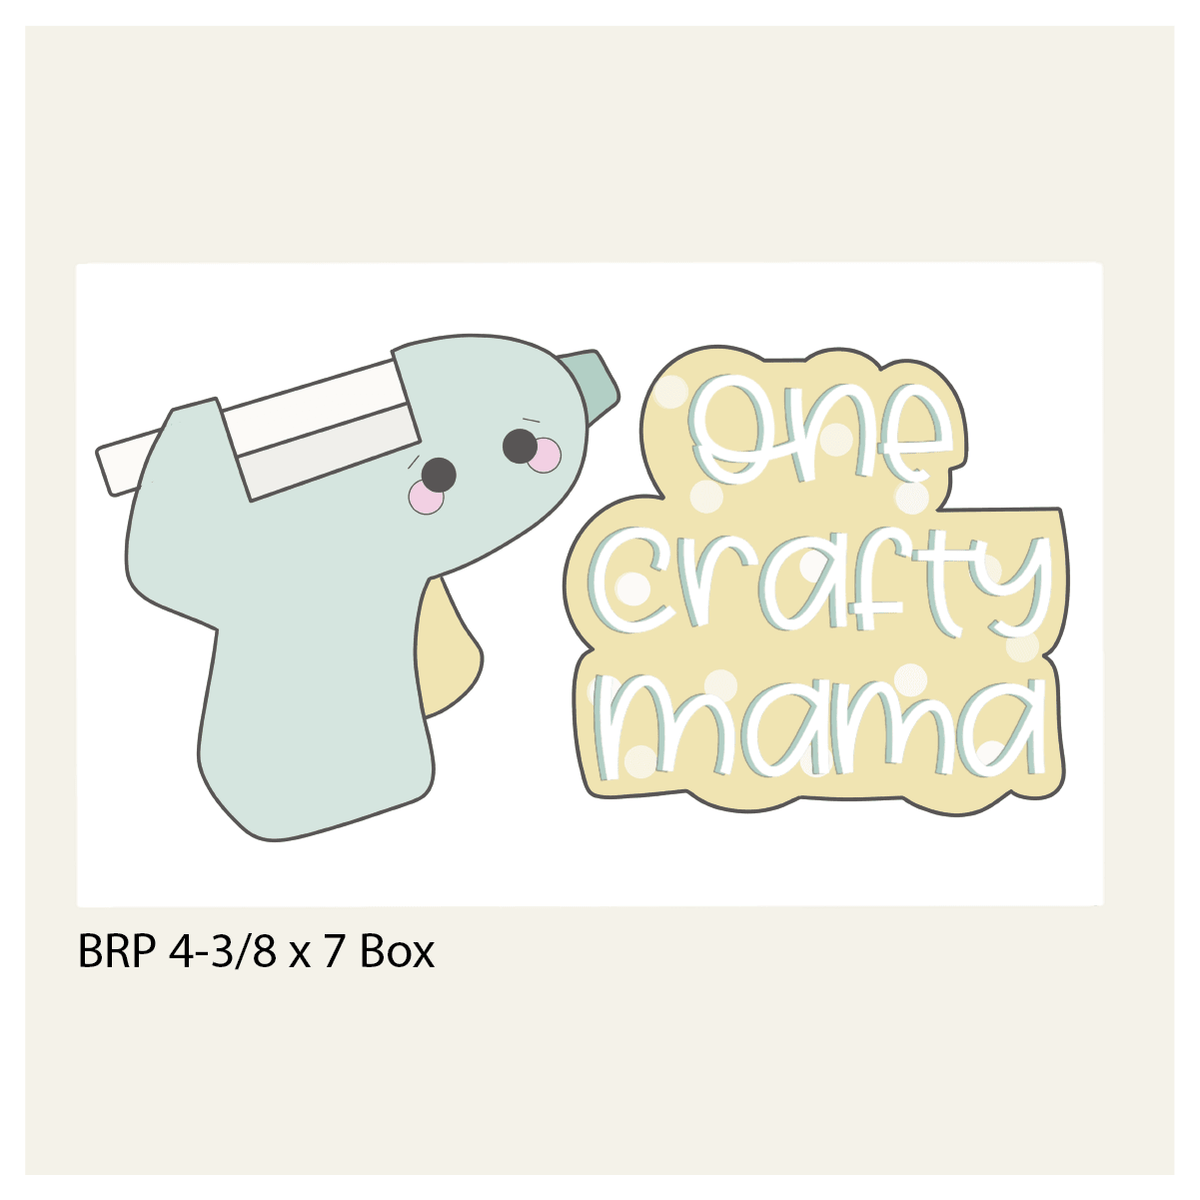 One Crafty Mama Hand Lettered Cookie Cutter - Sweetleigh 